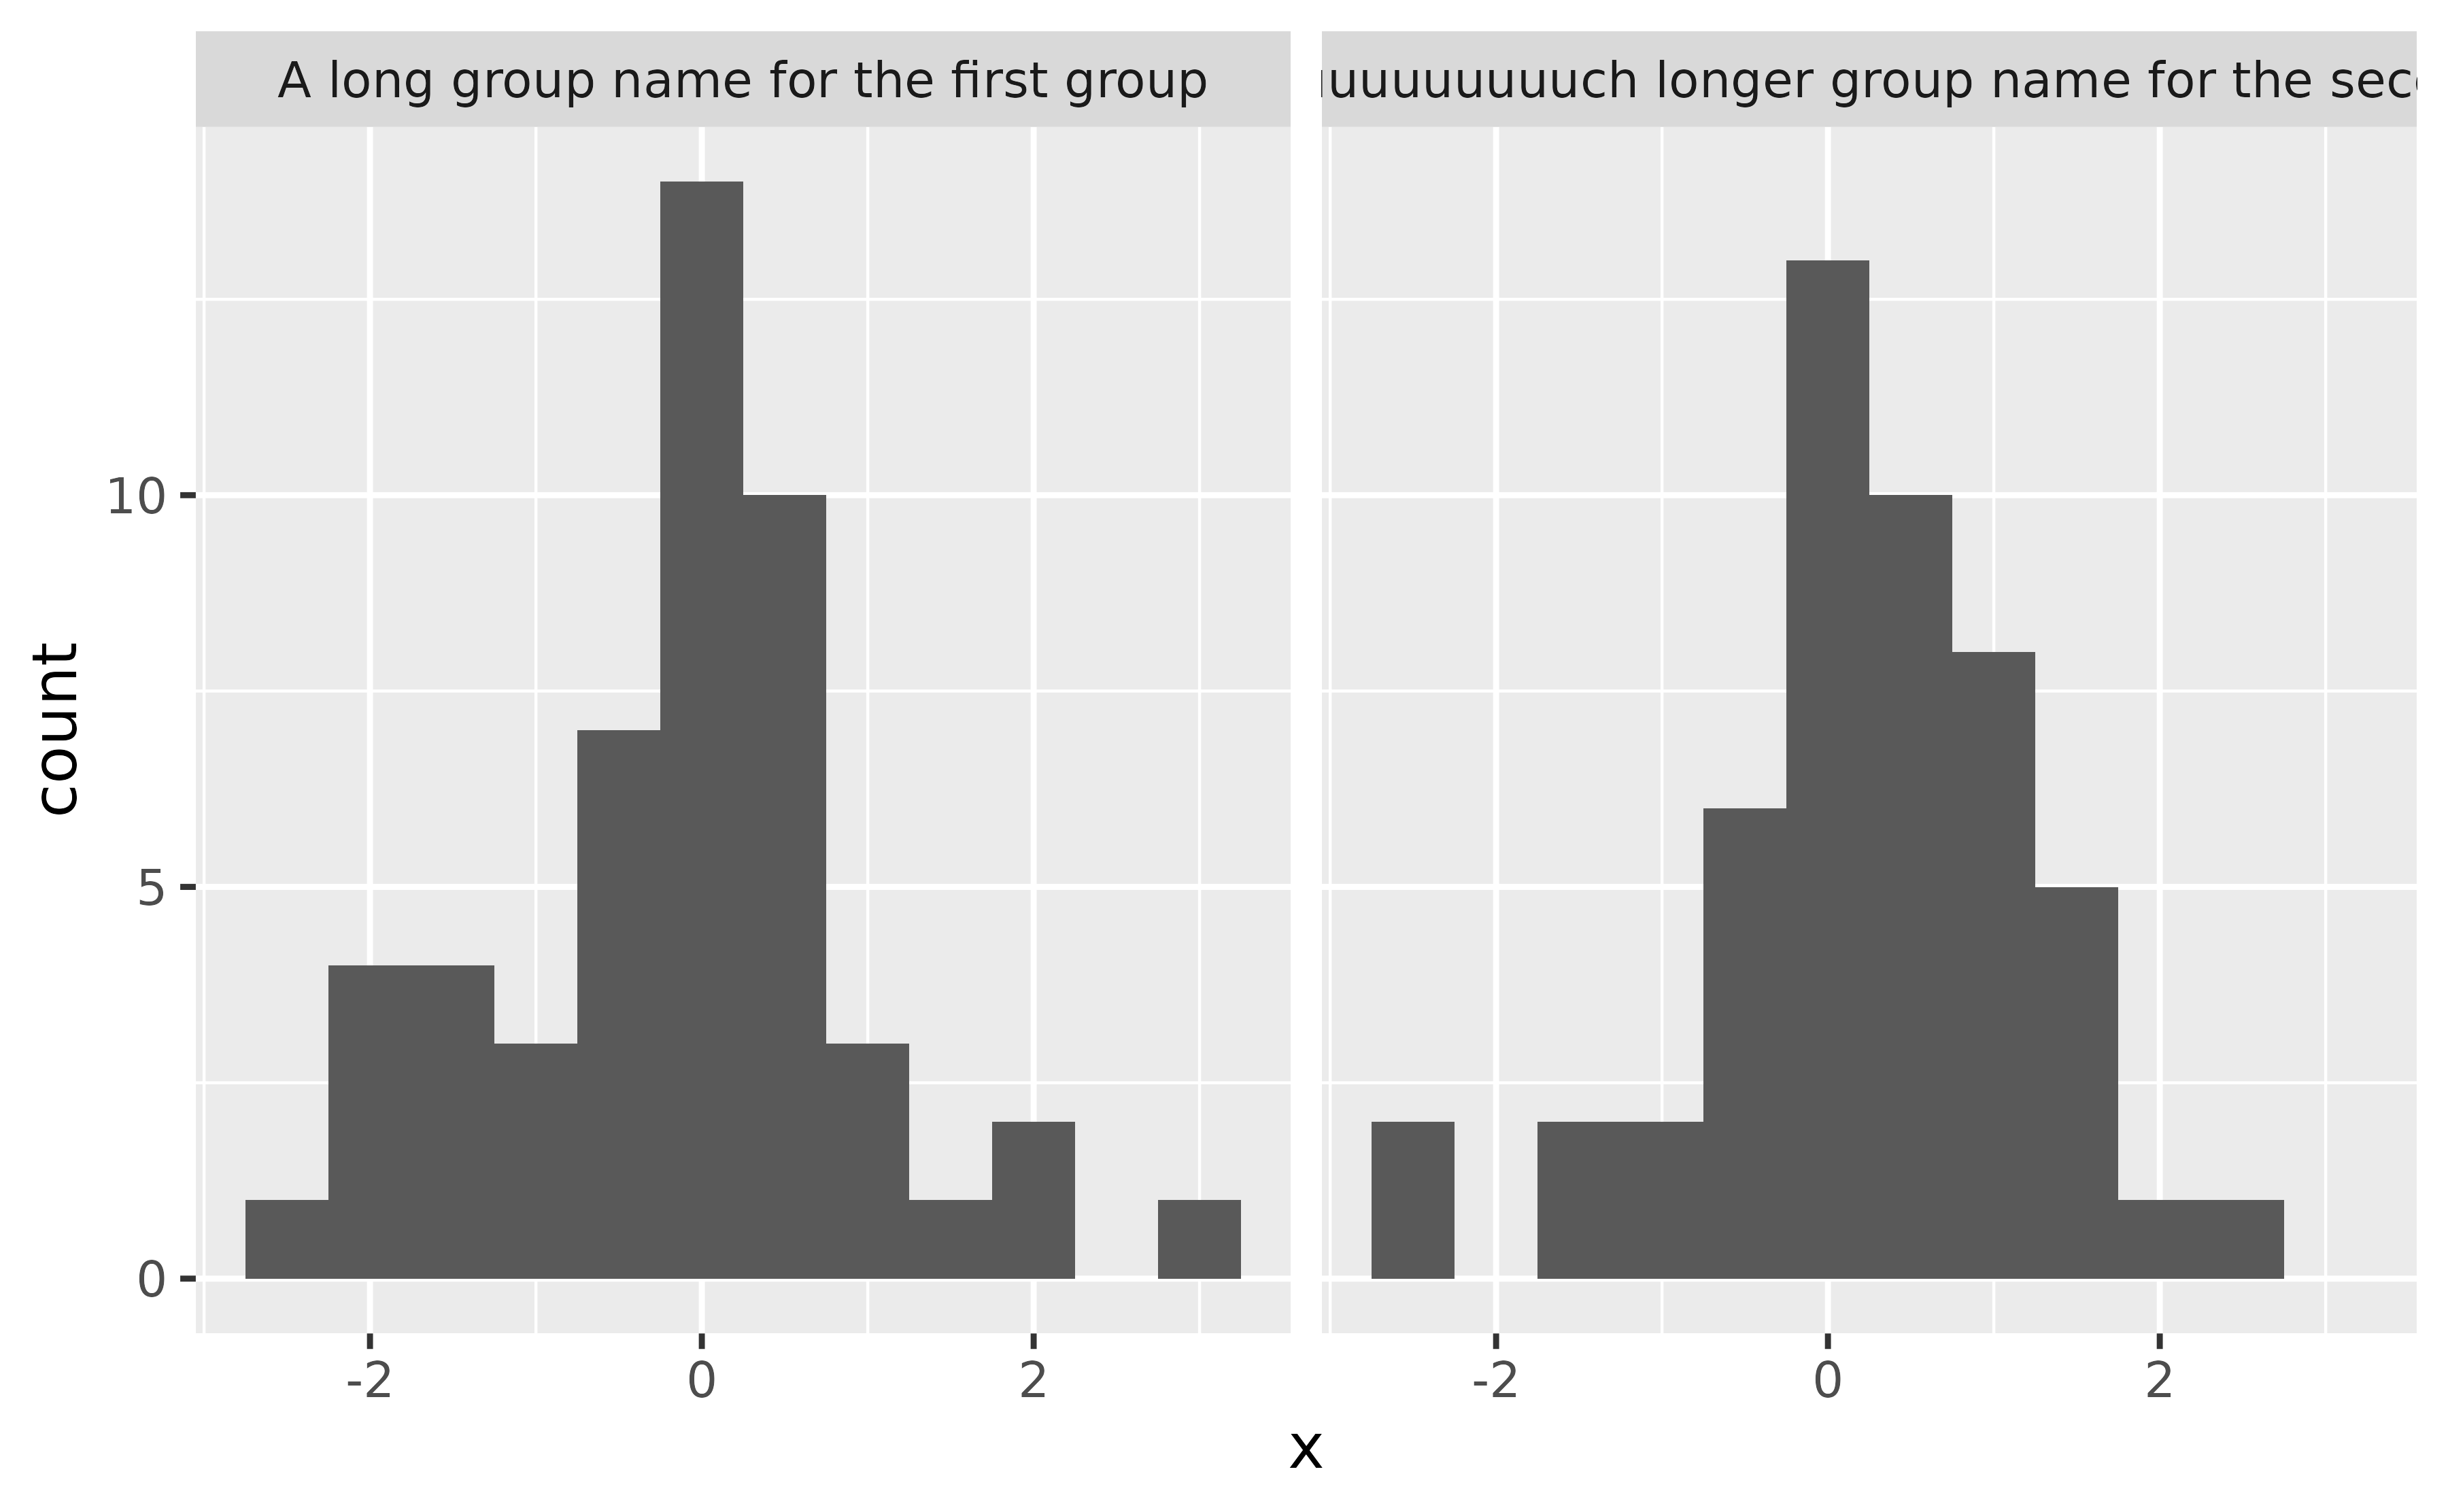 A histogram with two panels in a 1-row, 2-column layout of random data. The first panel has as title 'A long group name for the first group'. The second panel has a title 'A muuuuuuuuuuuuuch longer group name for the second group'. However, the second title is clipped to the panel width and doesn't show all the text.